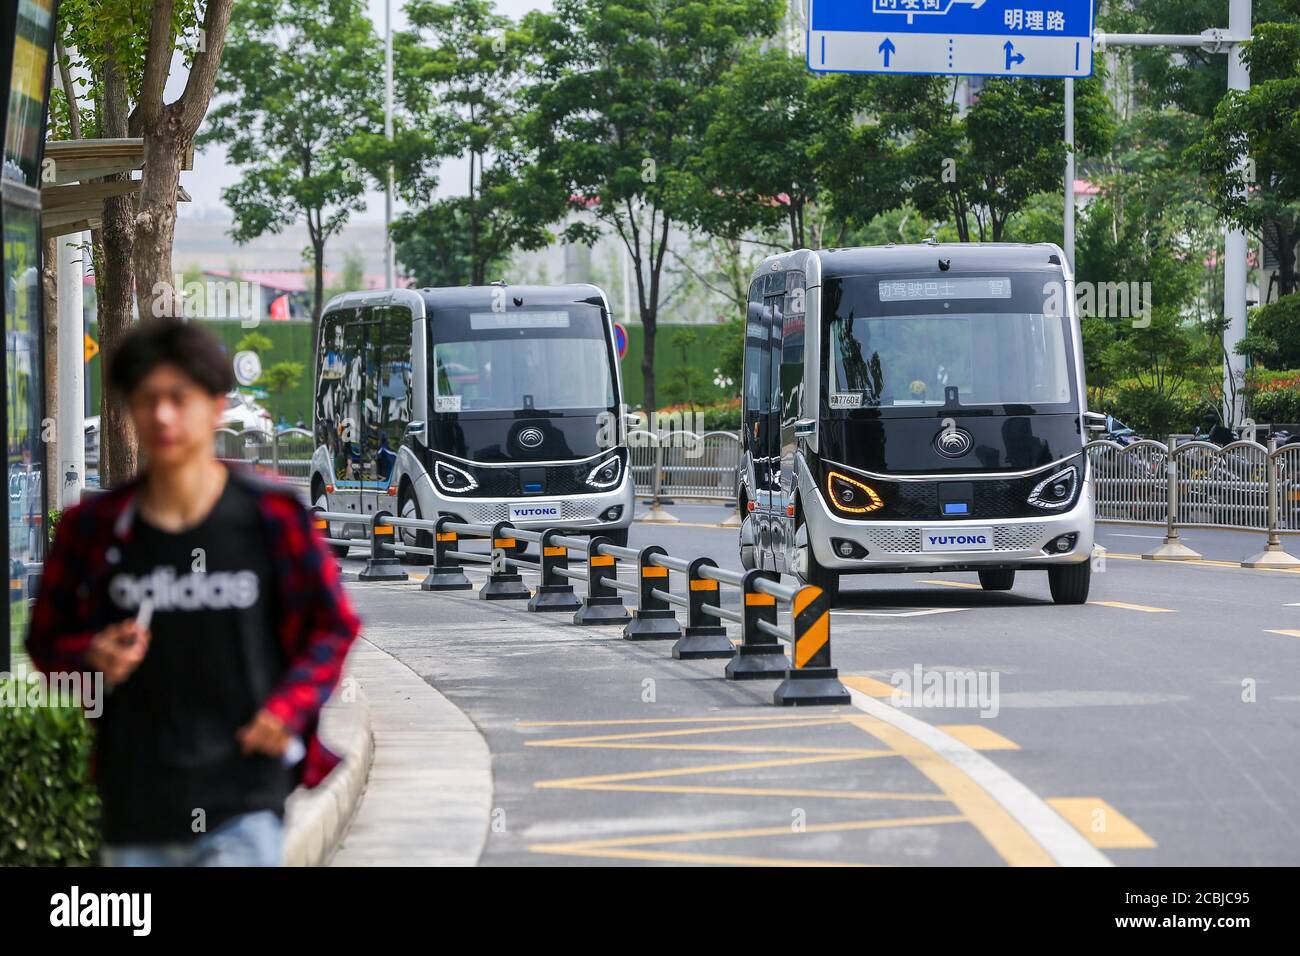 Zhengzhou, Zhengzhou, China. 14th Aug, 2020. HenanÃ¯Â¼Å'CHINA-On August 11, 2020, henan zhengzhou, zhengdong new district give wisdom island lake loop, yutong automated driving bus has run for a year, which is based on 5 g of L4 automated driving bus have highly intelligent, driven and autonomous obstacle avoidance, patrol intersection peers such as task can be accurate, complete, can also identify ambulances, fire engines, etc and take the initiative to give way.''Smart car   smart road   ubiquitous cloud'' is bringing great changes to zhengzhou citizens' travel. Despite being in operation Stock Photo